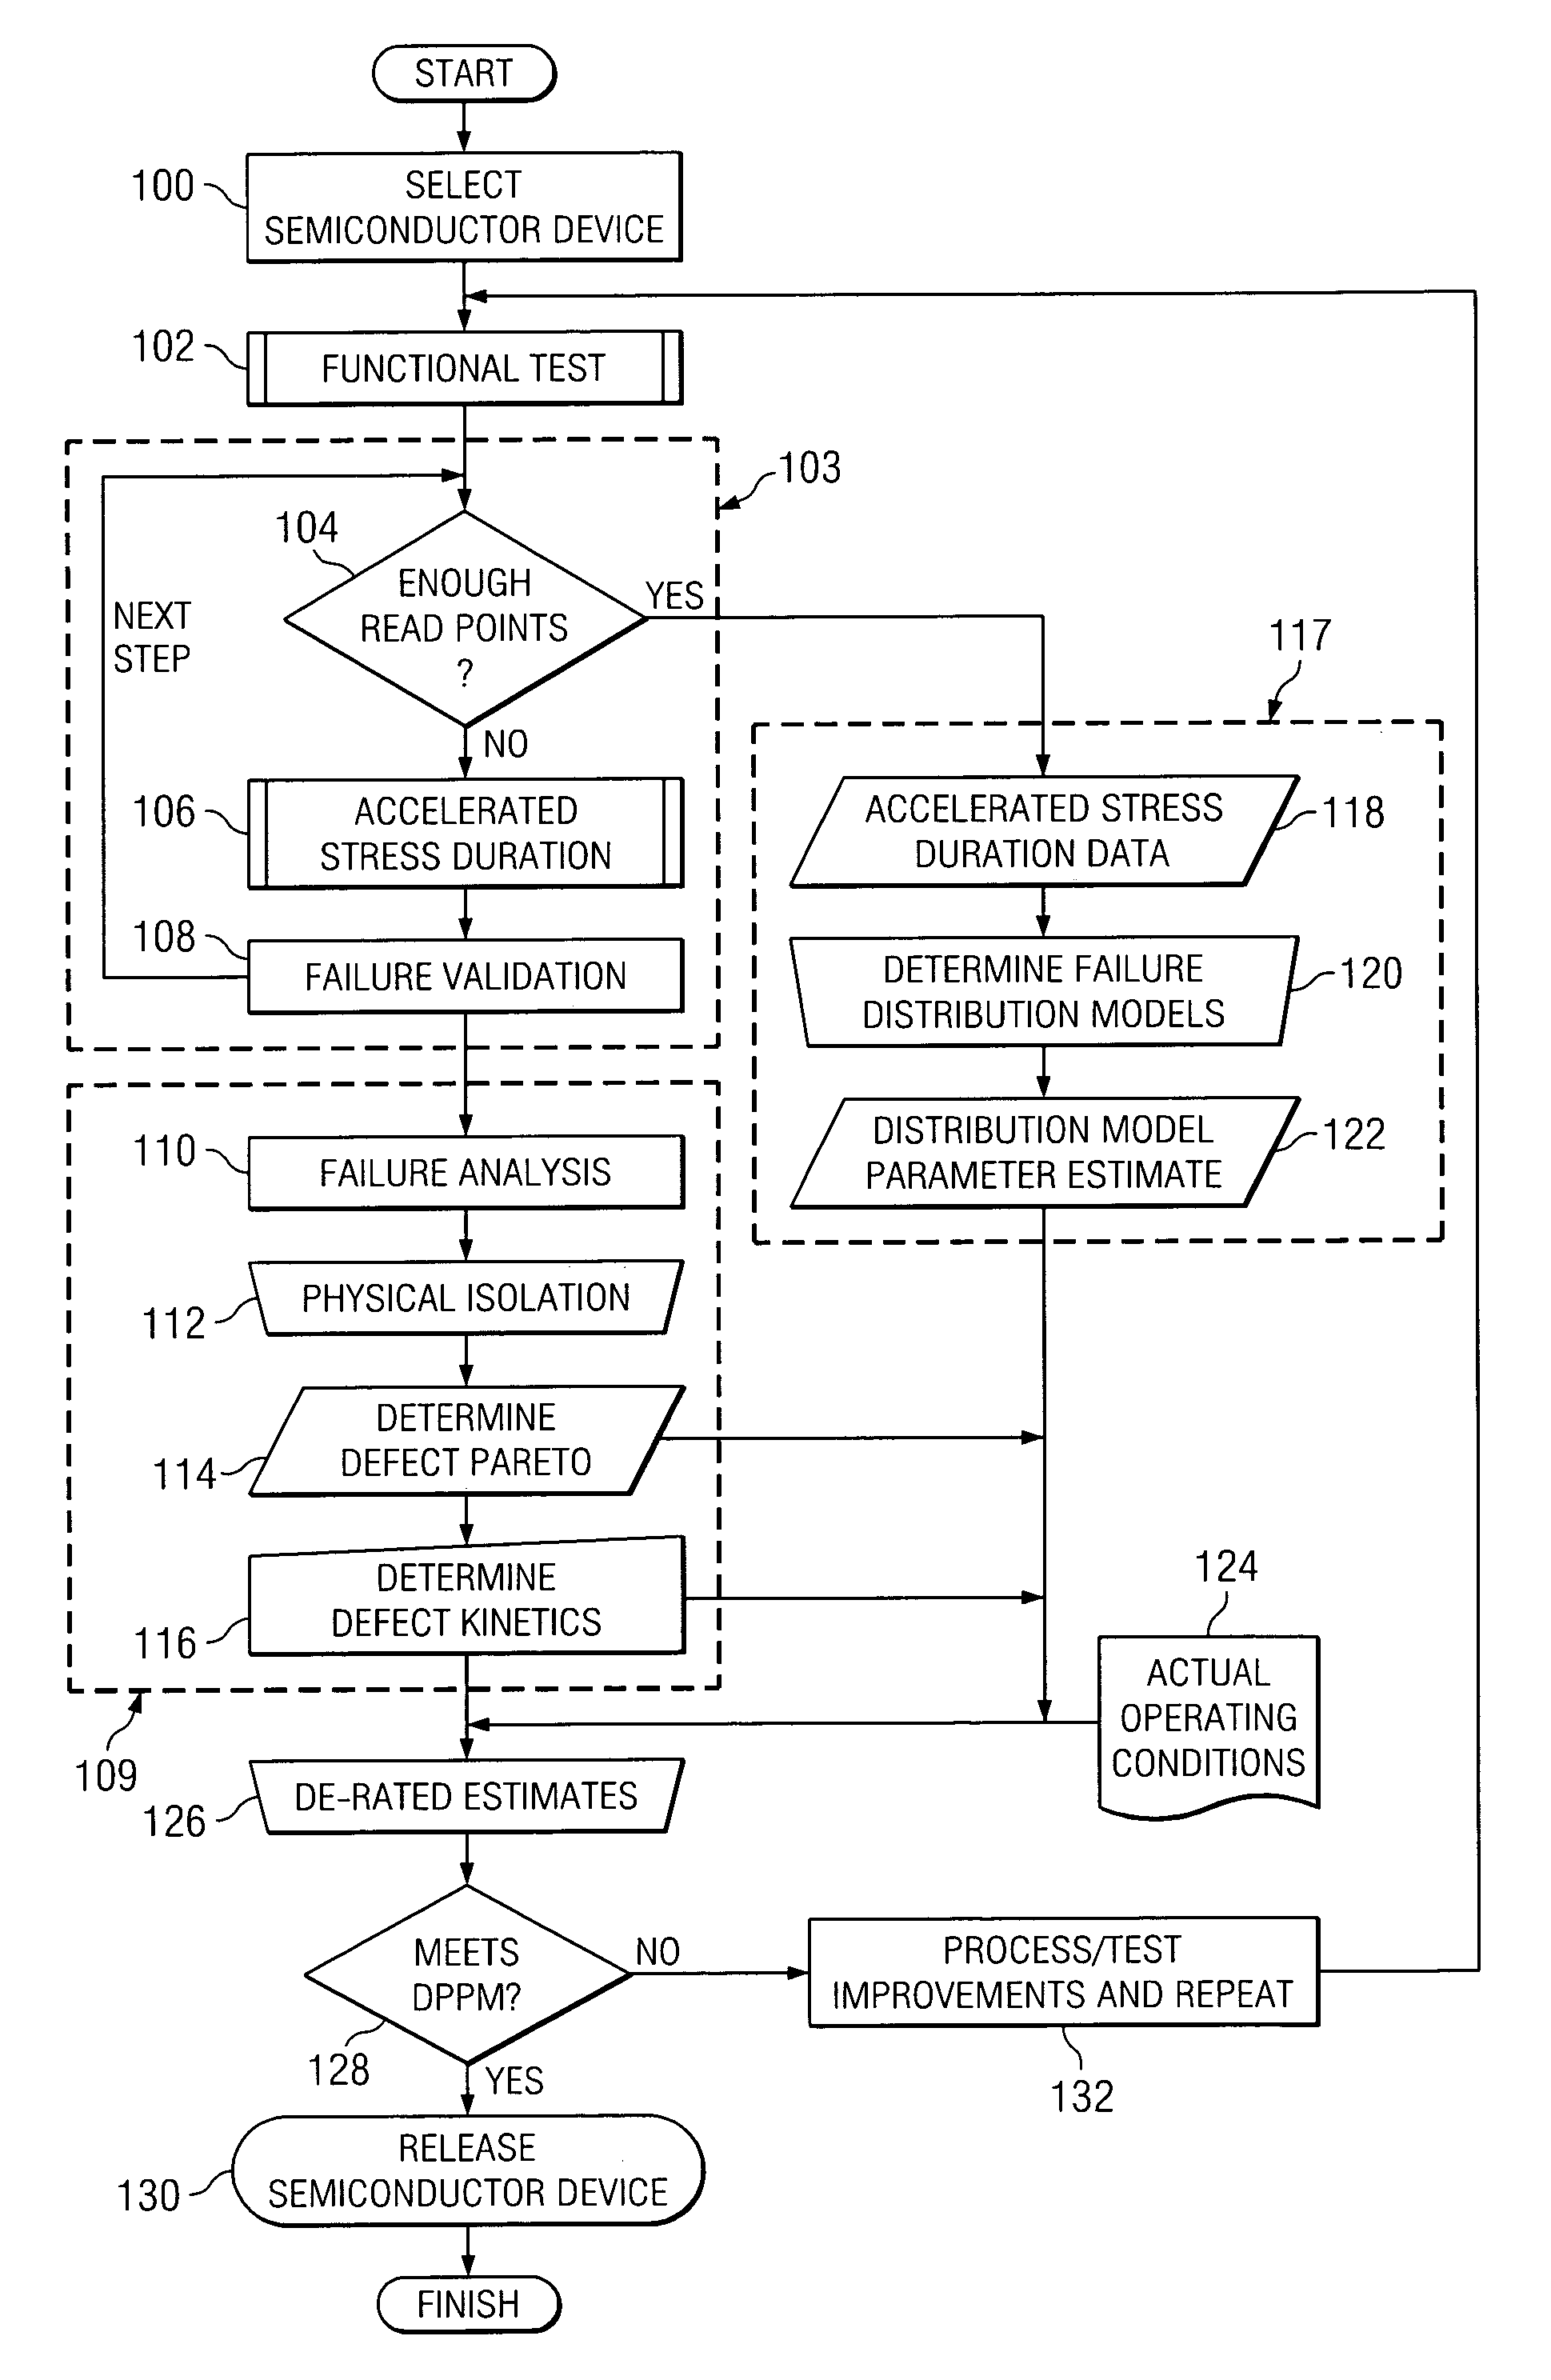 Method for estimating the early failure rate of semiconductor devices